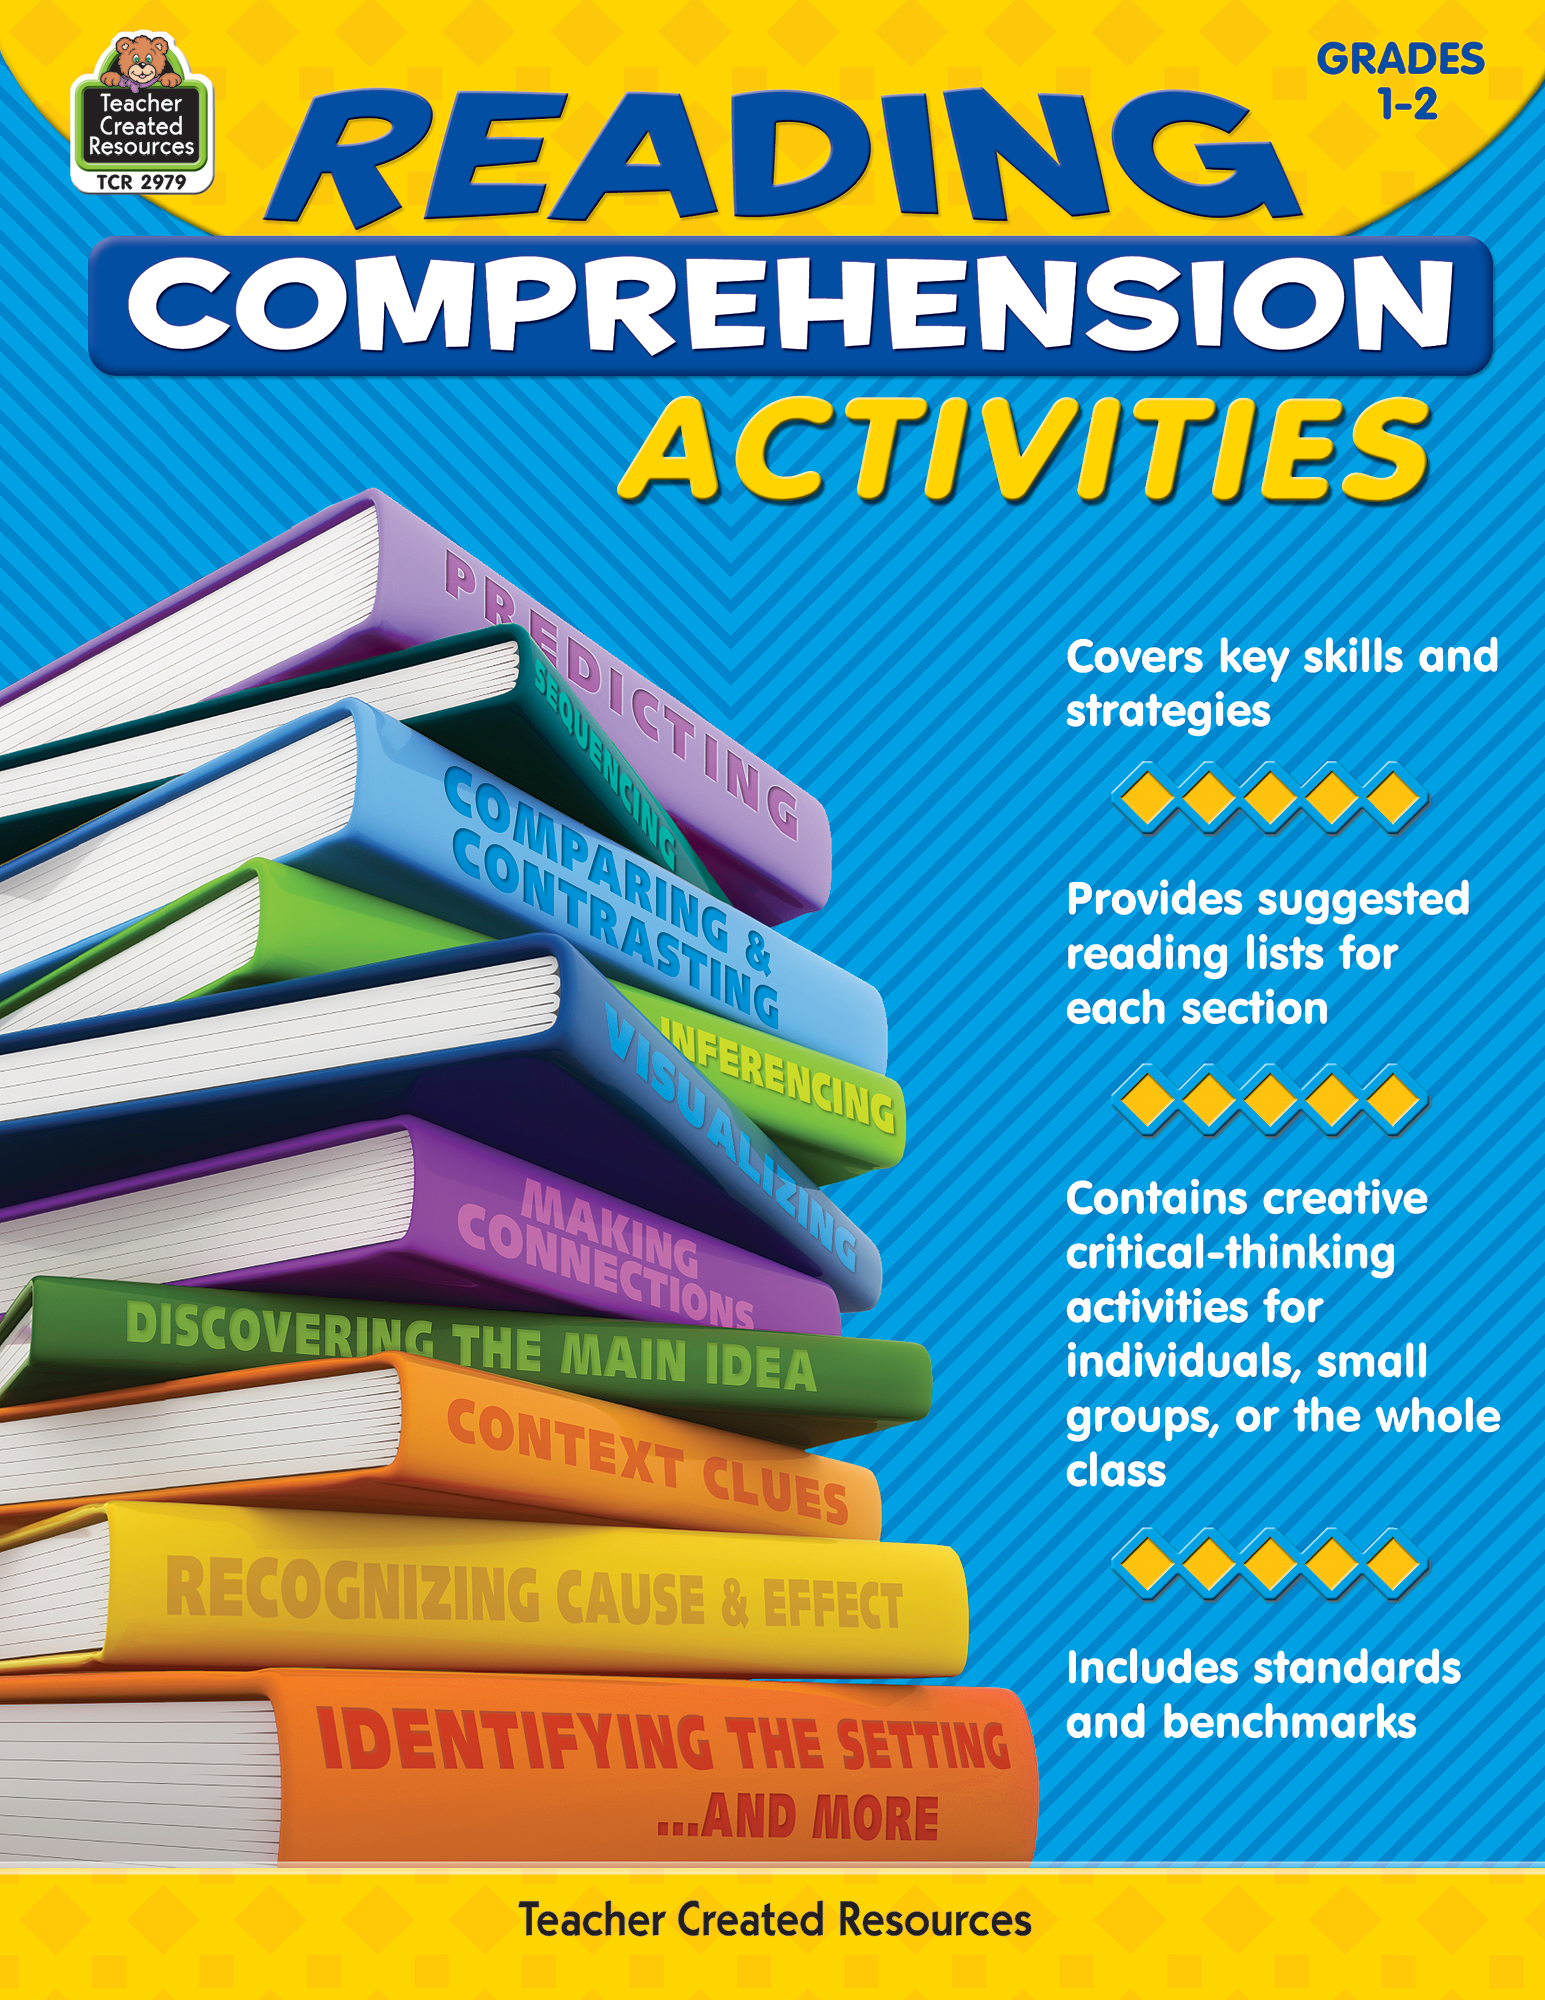 reading-comprehension-activities-grade-1-2-tcr2979-teacher-created